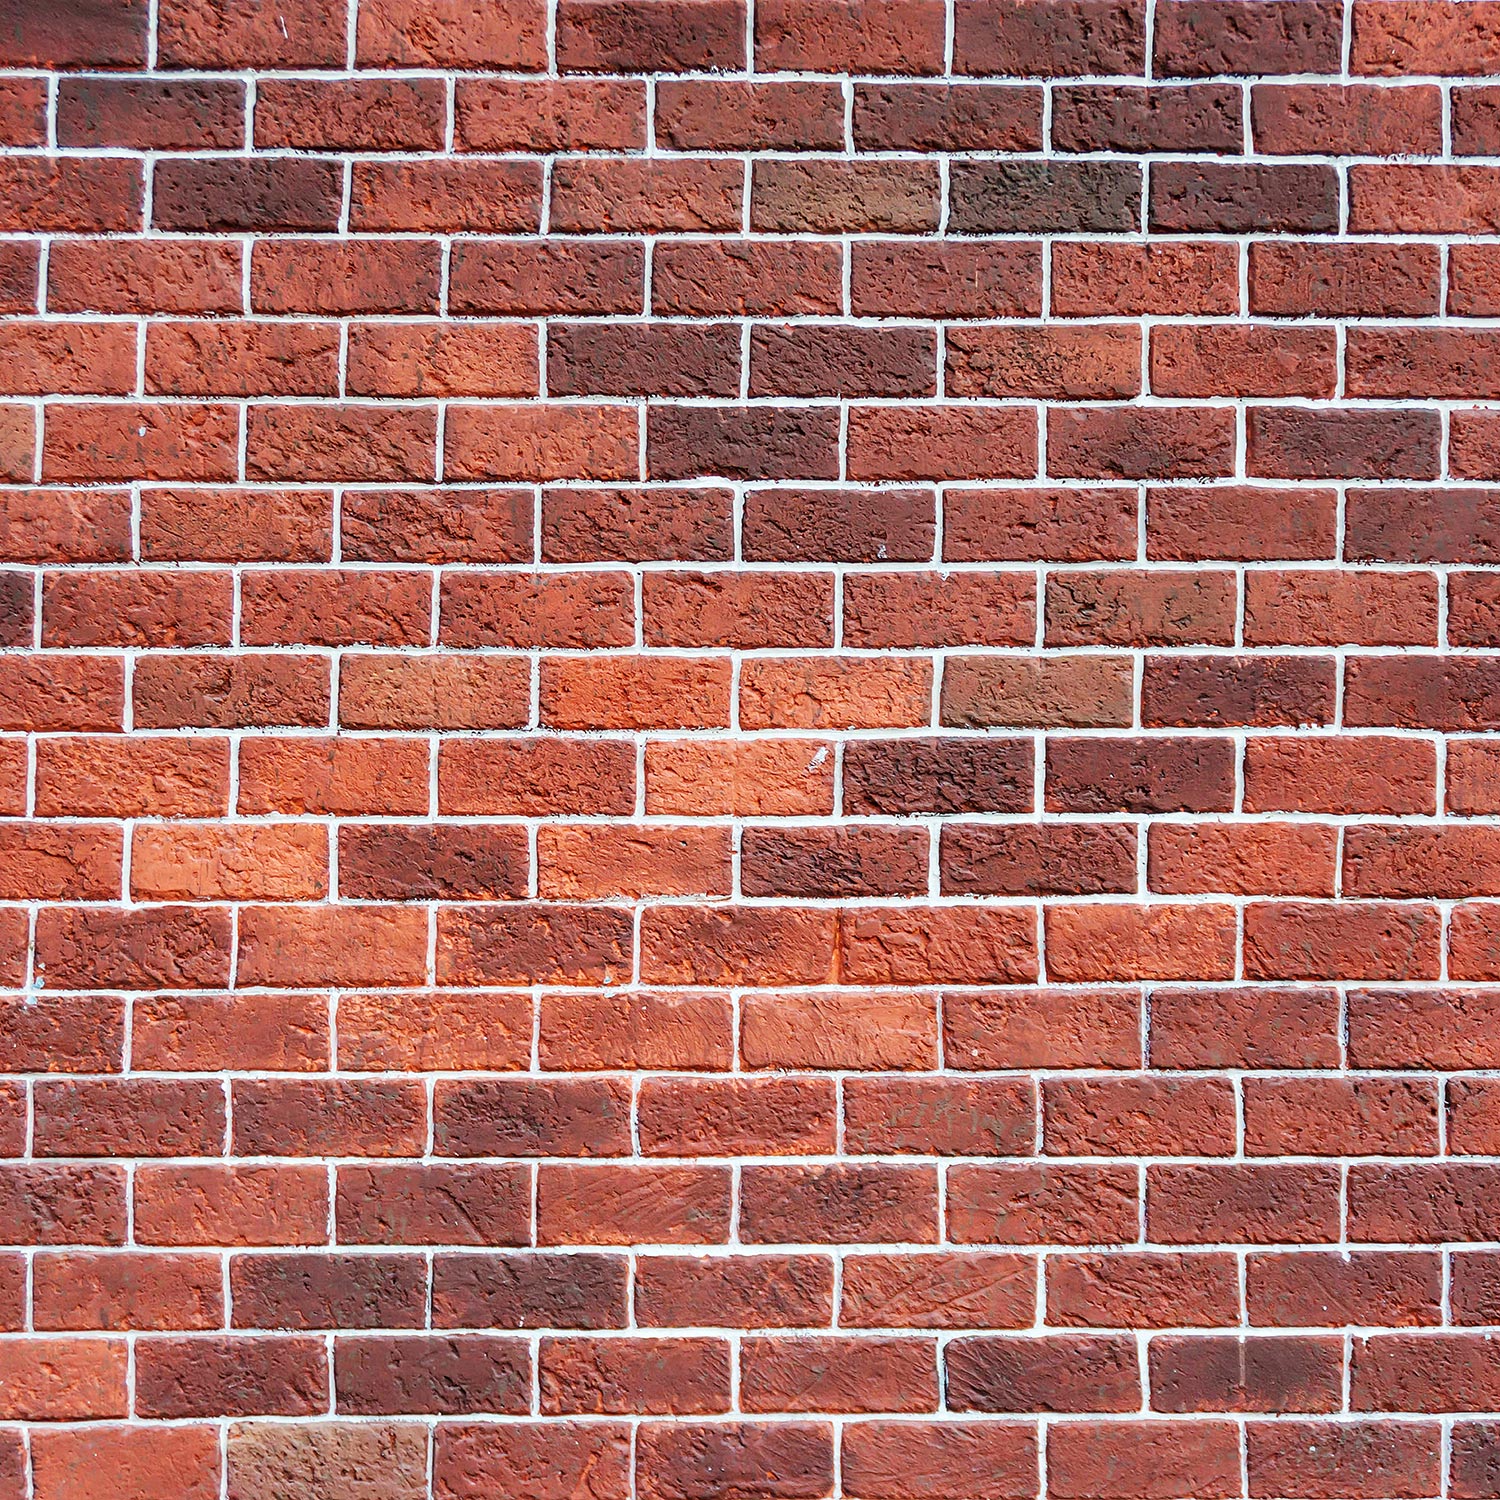 Free download Elegant Brick Wall Picture Red Wallpaper For Decor Design